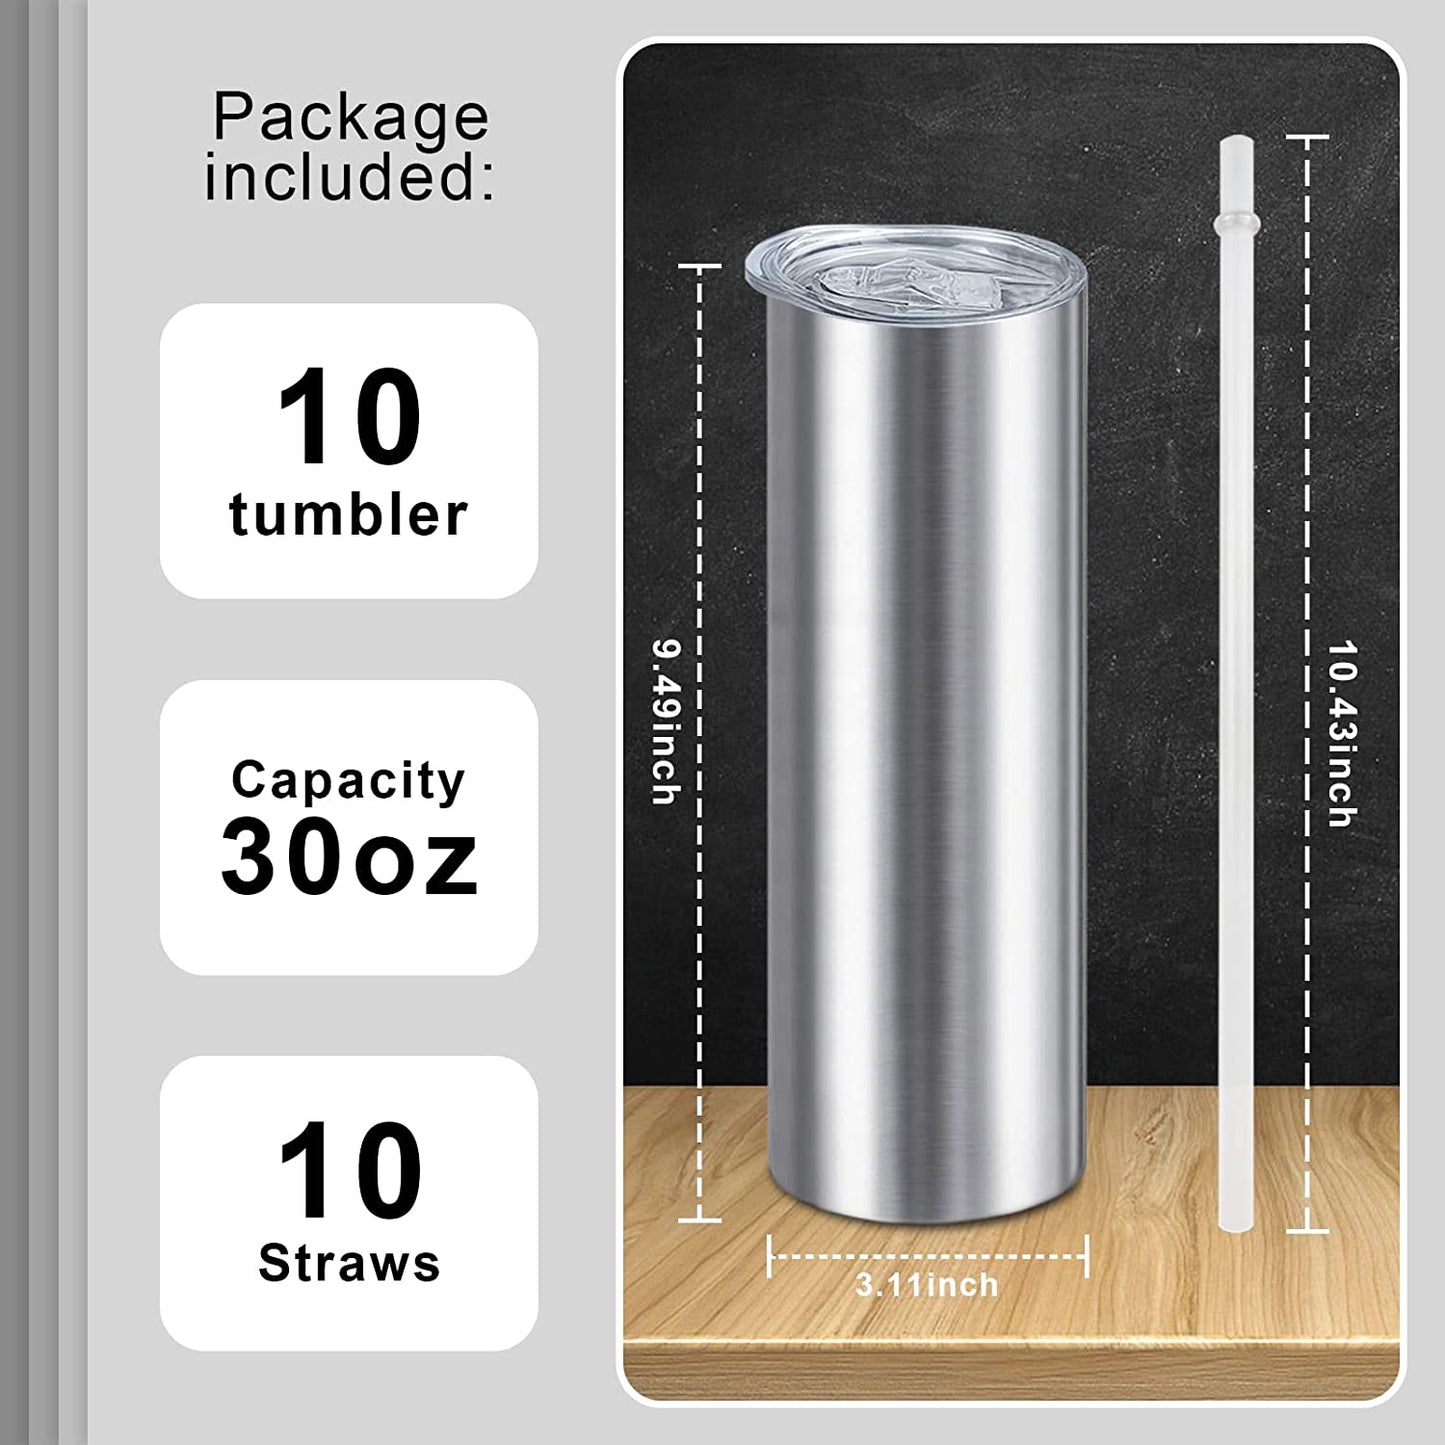 20oz (10unit) Skinny Silver Sublimation Tumblers Blanks Tumbler Cups